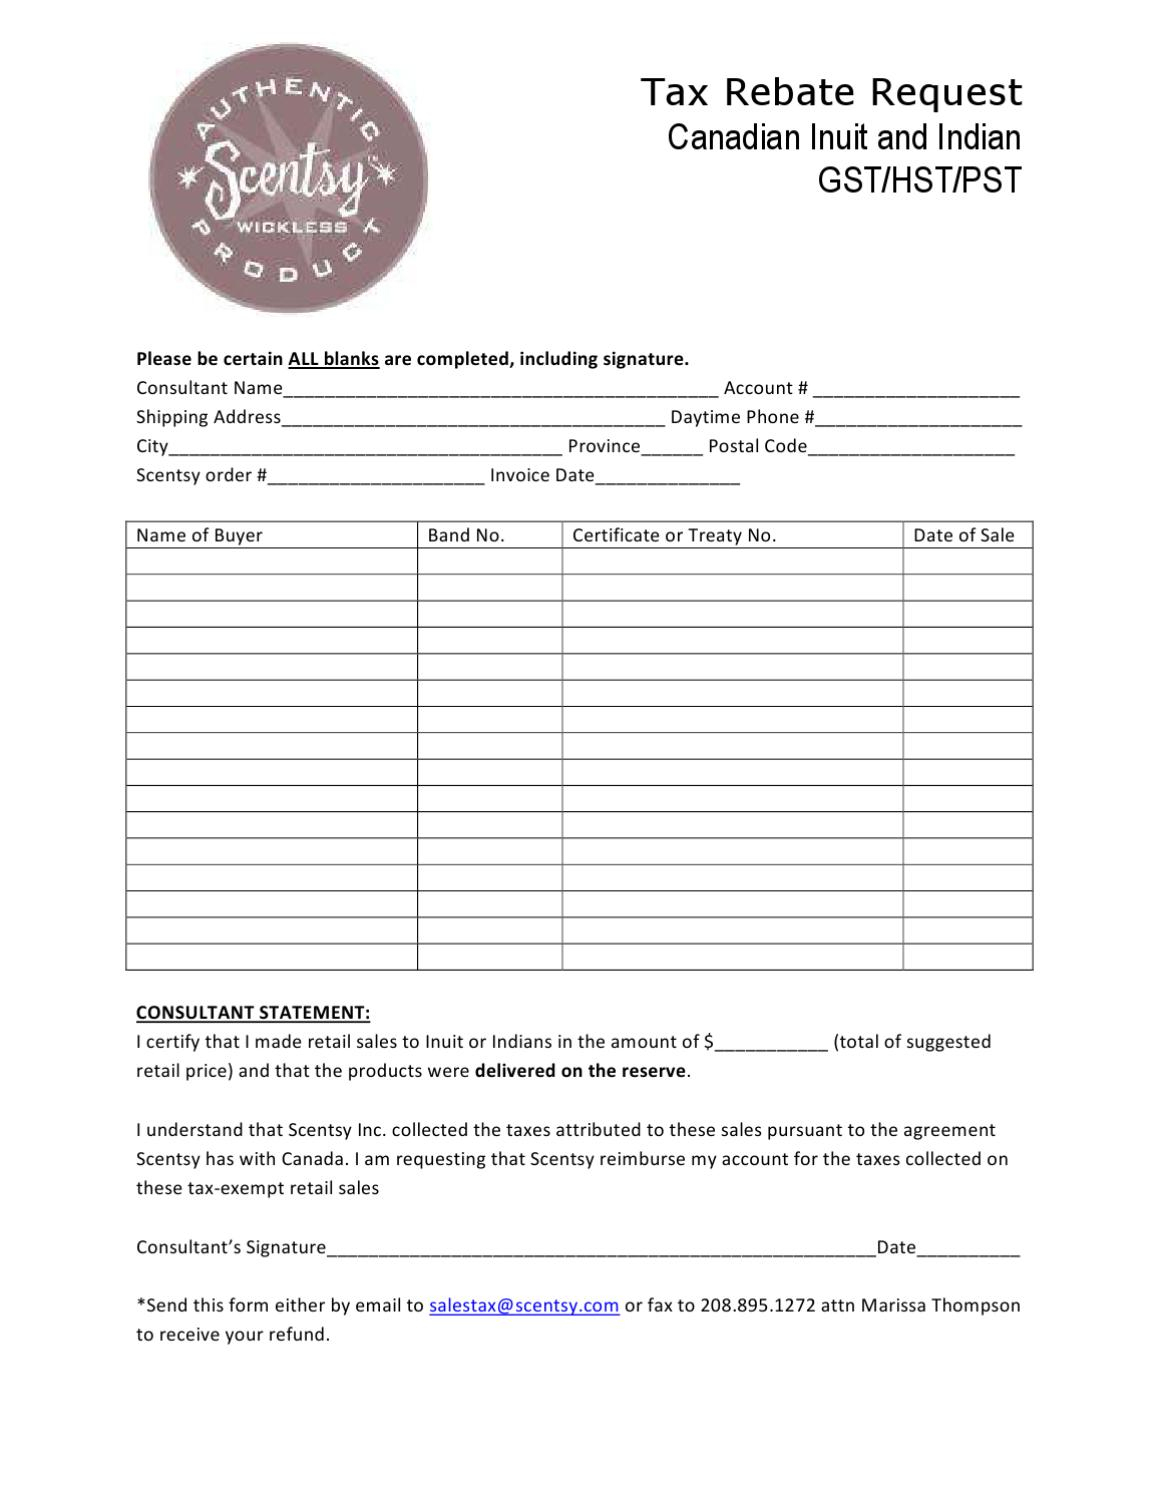 Native Tax Rebate Form (Canada)Natalie Zuidhof - Issuu - Free Printable Scentsy Order Forms